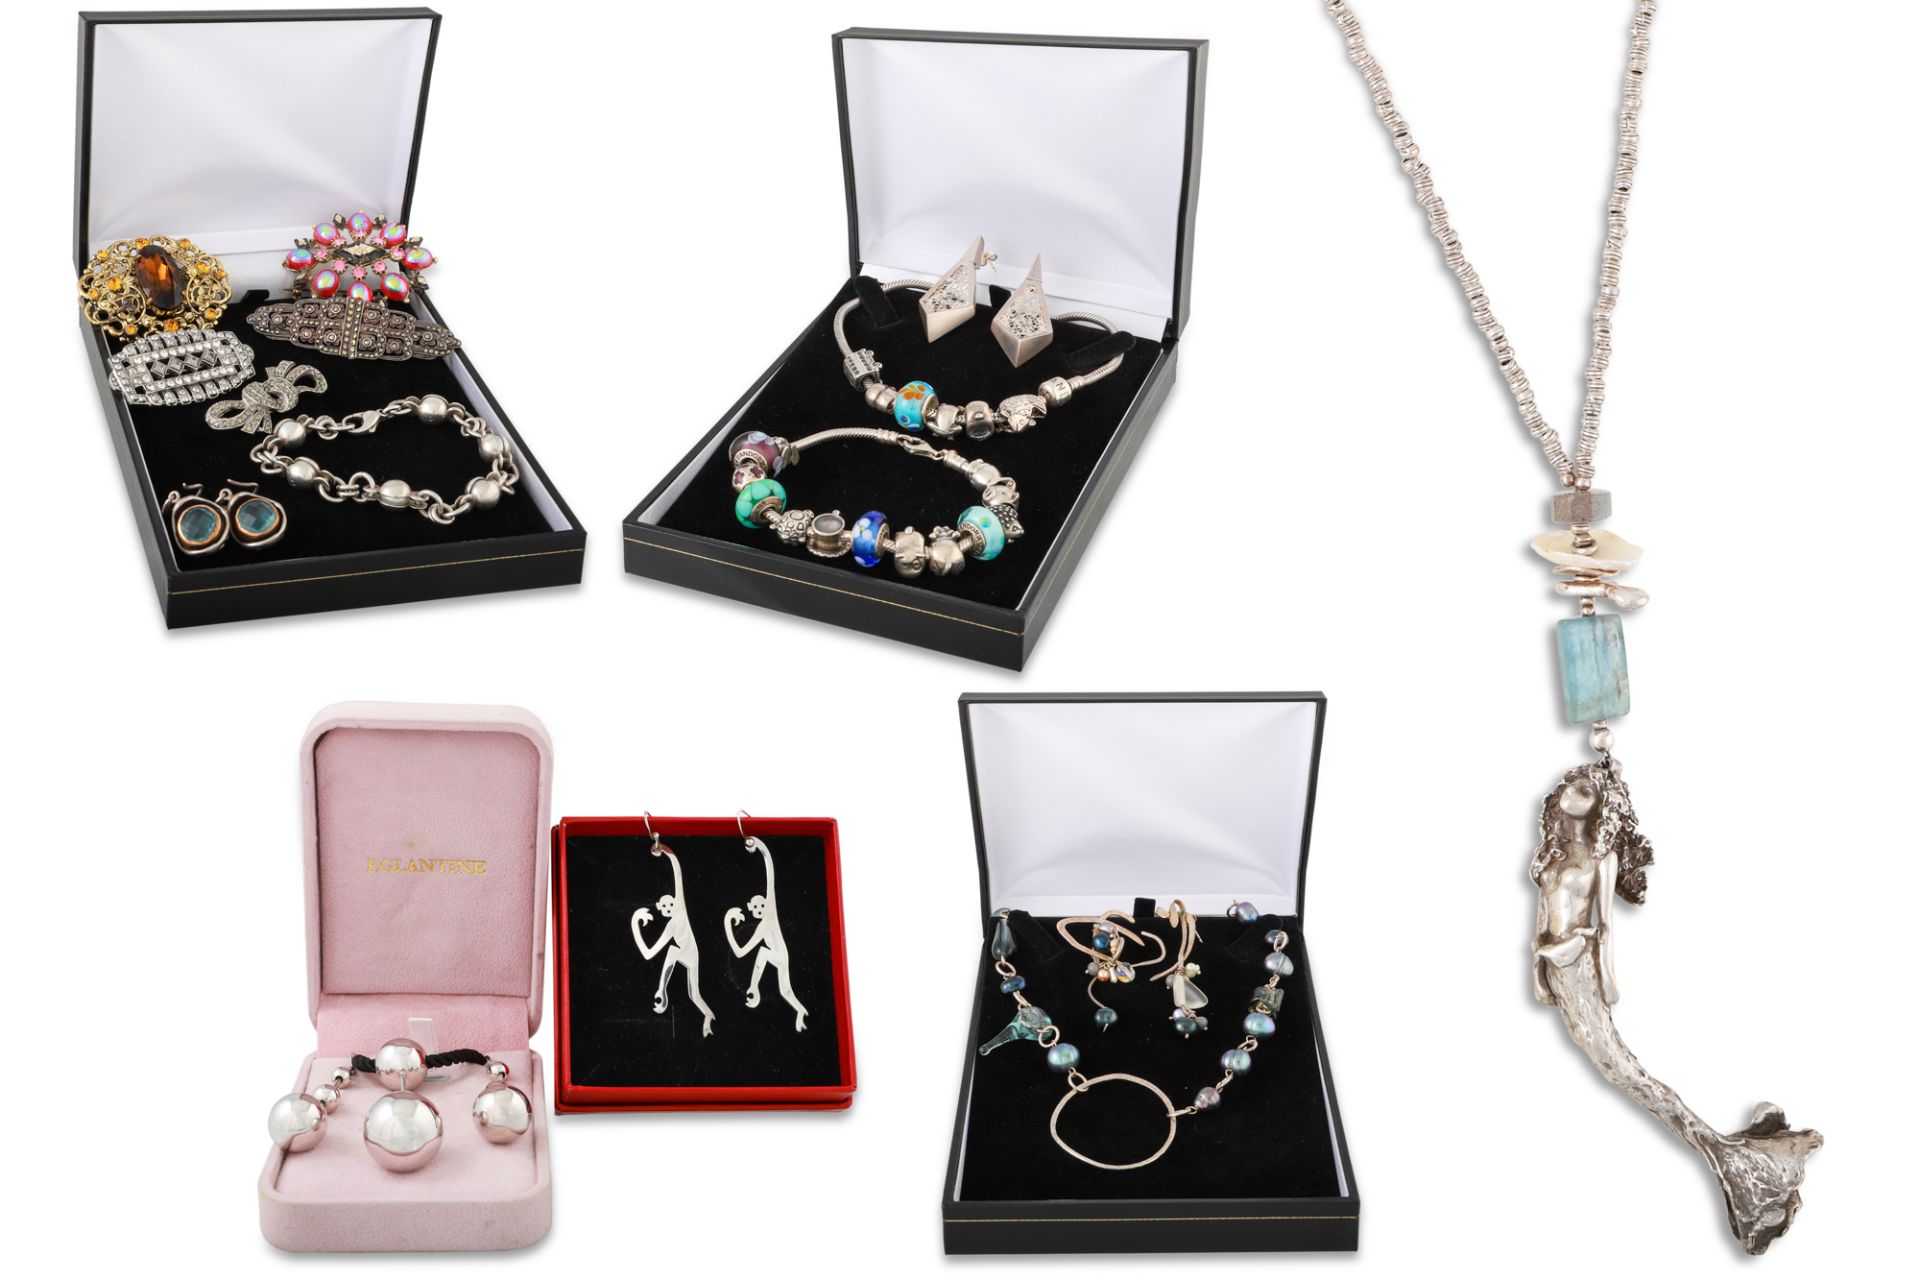 AN INTERESTING COLLECTION OF IRISH HANDCRAFTED SILVER JEWELLERY PIECES, together with a